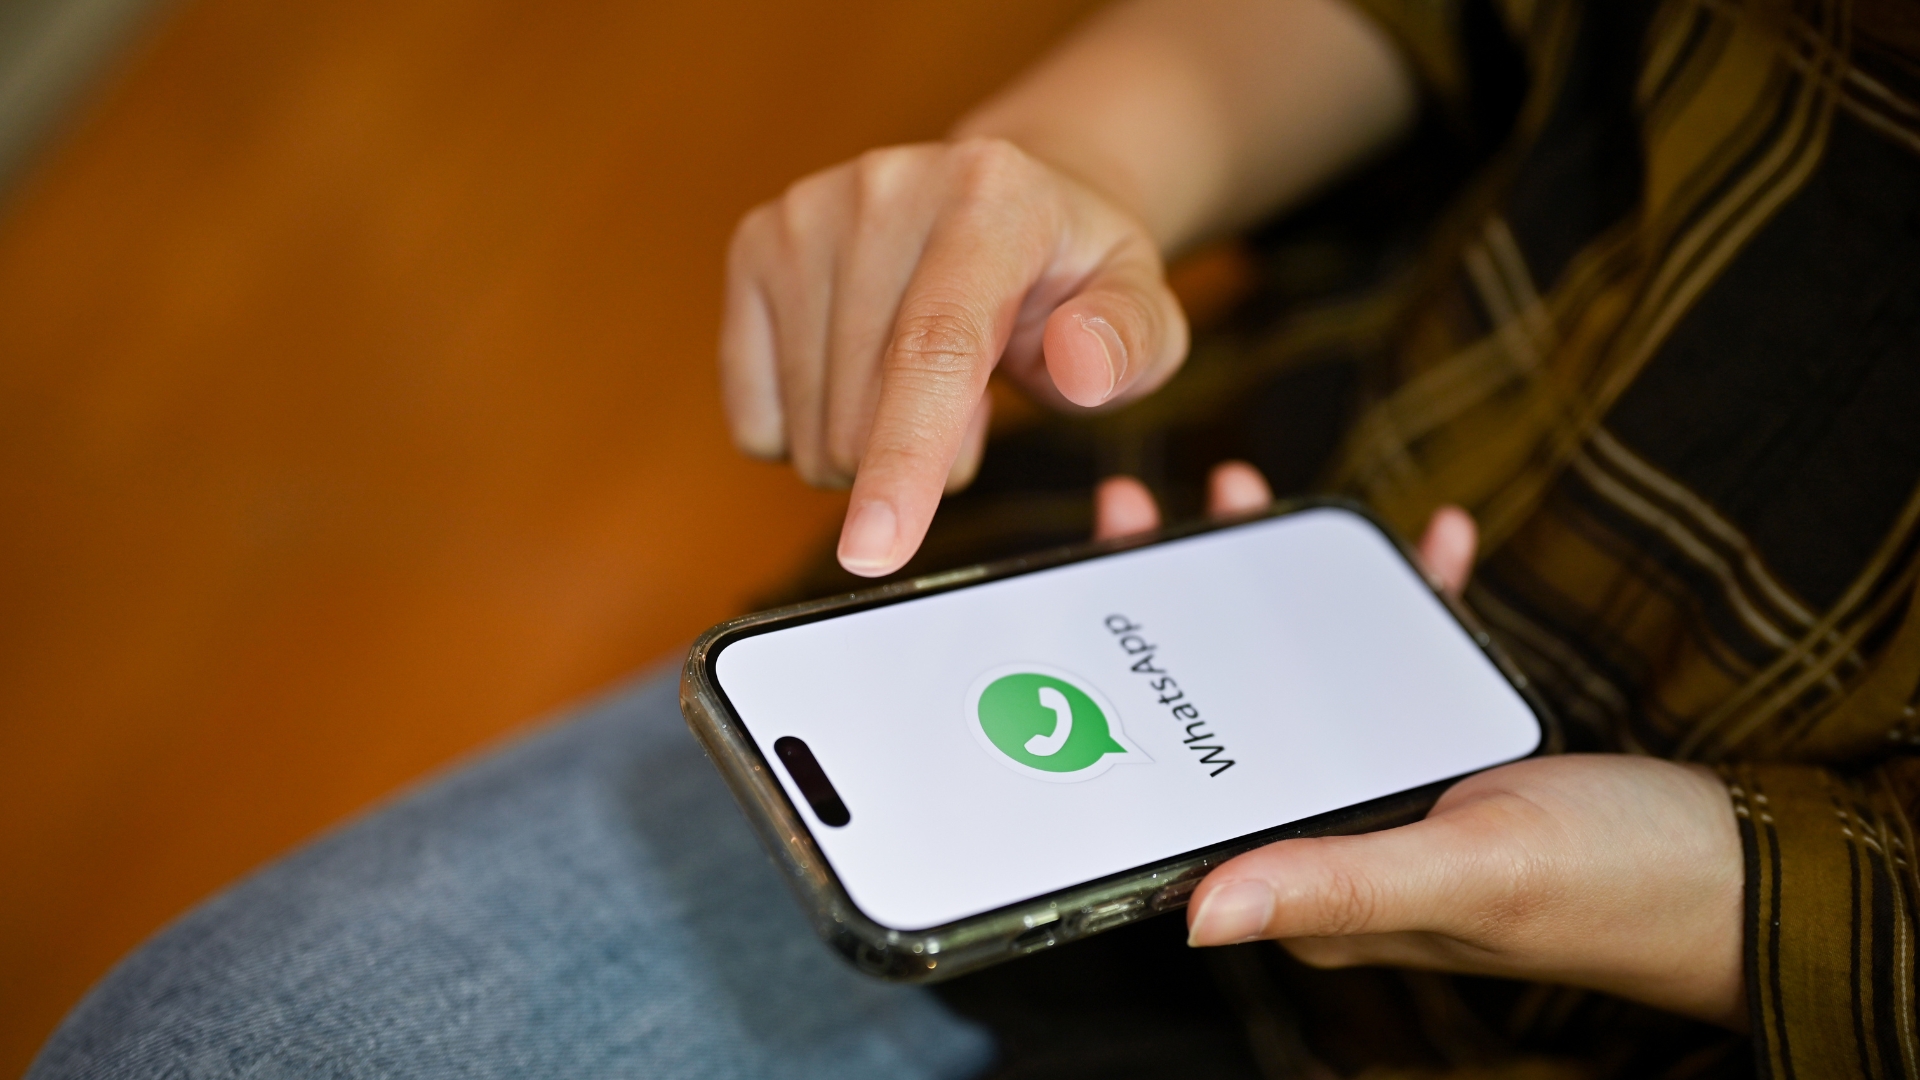 Learn how to recover a deleted conversation on WhatsApp